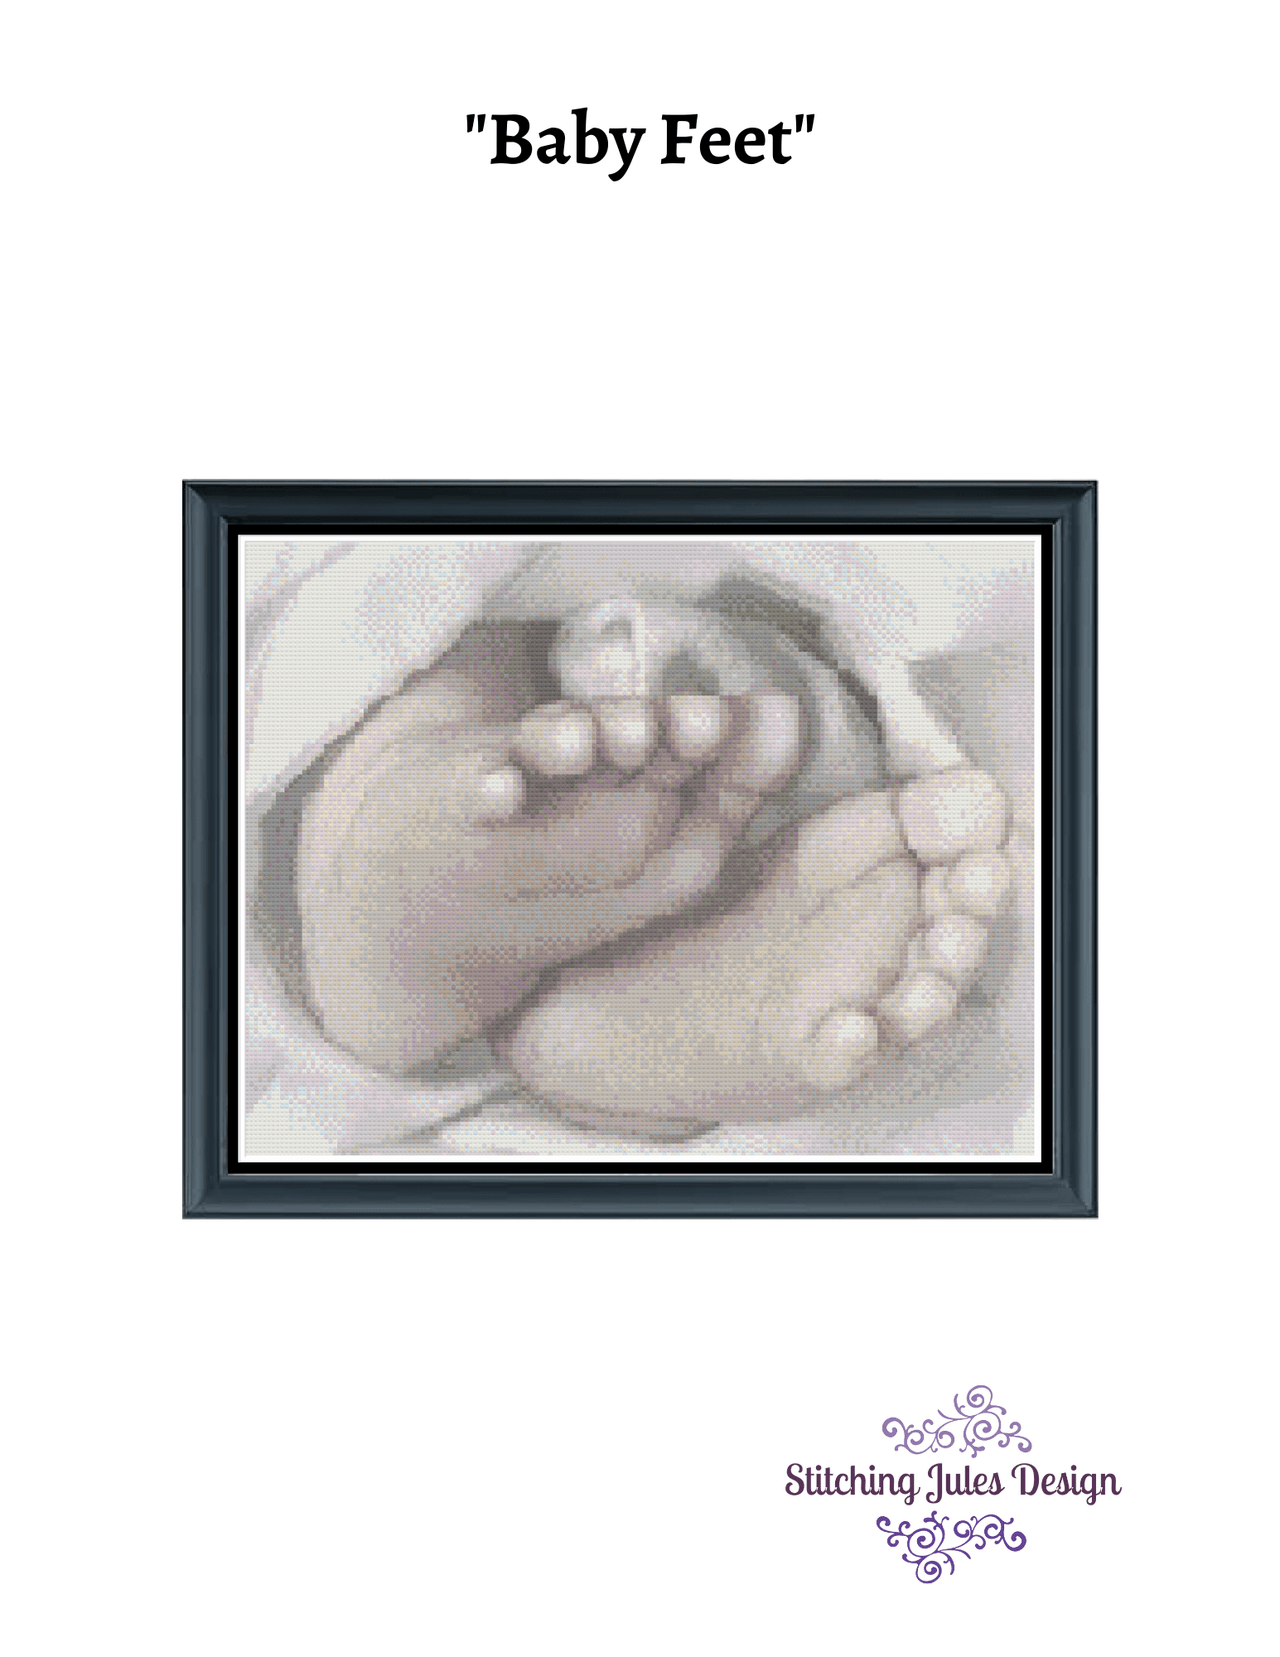 Stitching Jules Design Cross Stitch Pattern Baby Feet Cross Stitch Embroidery Needlepoint Digital Pattern Ready For PDF Instant Download